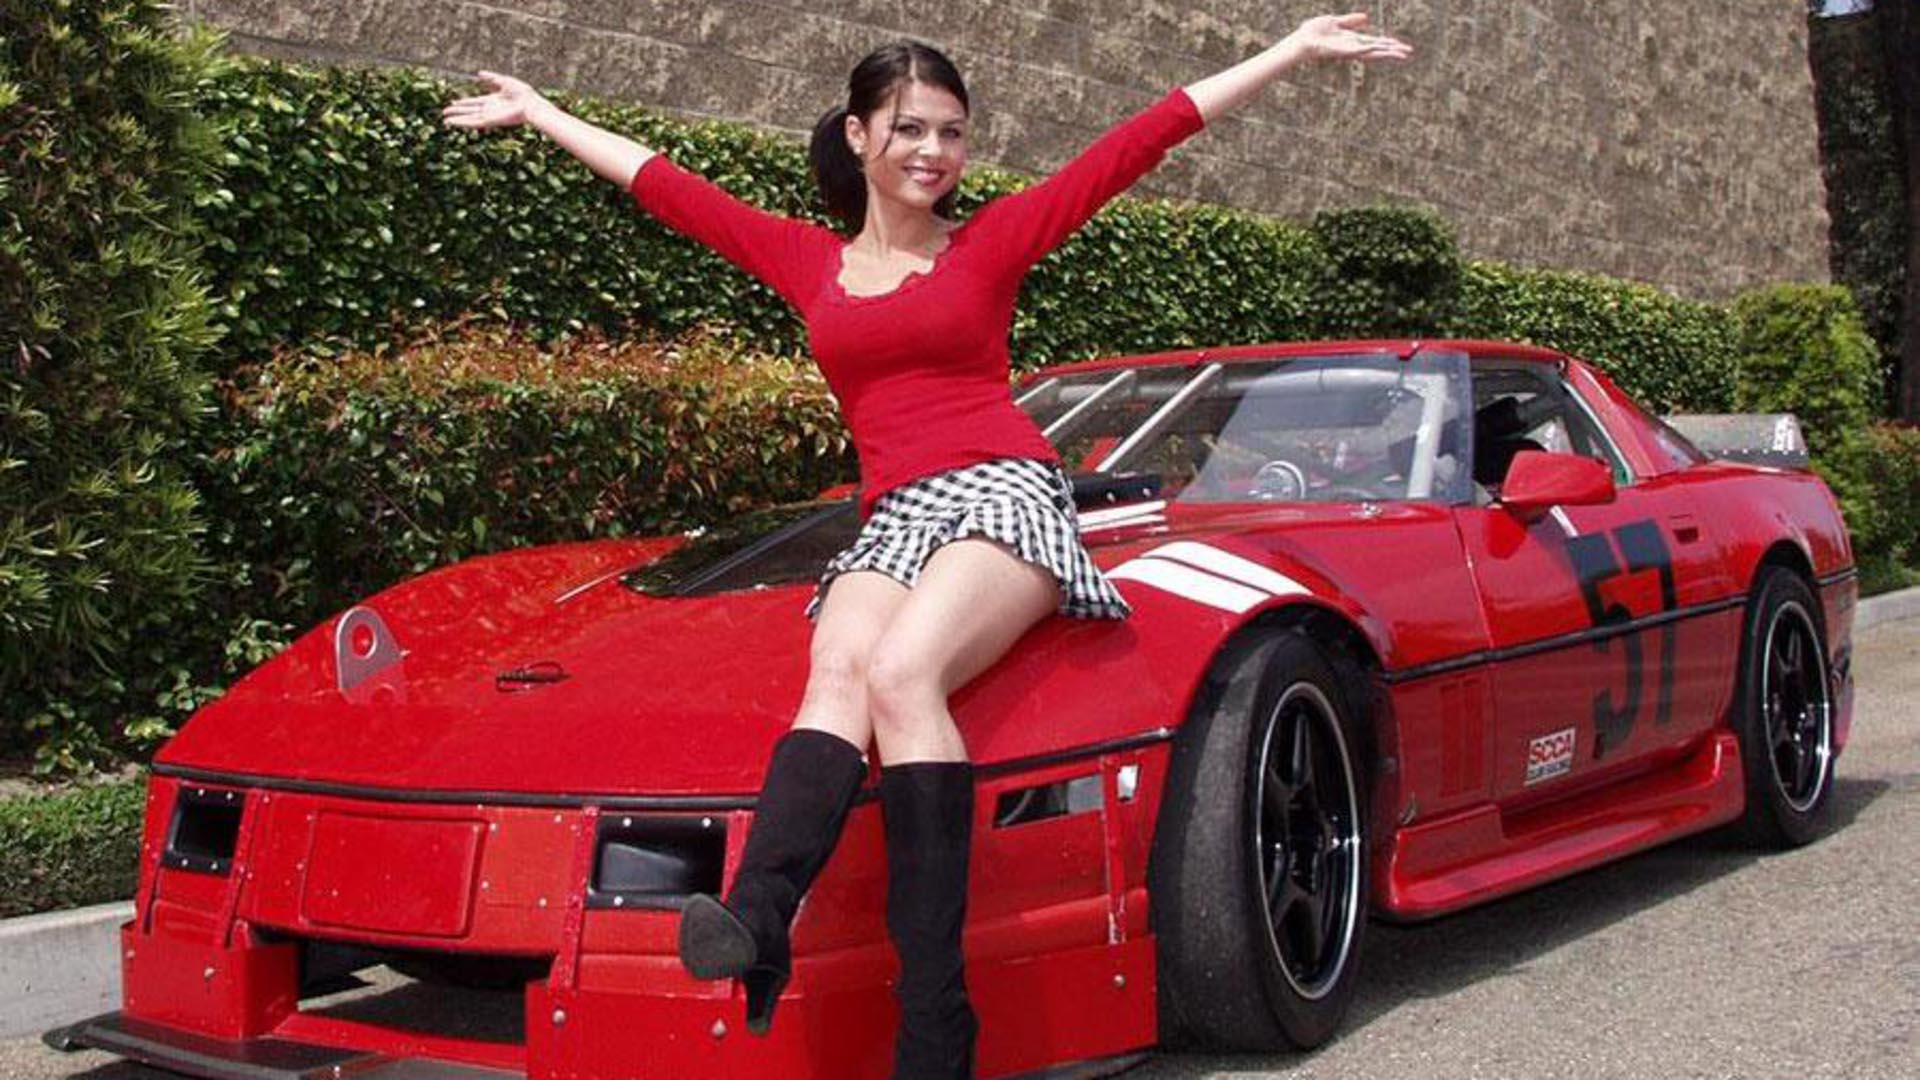 Exotic Red Car And Girl In Red Dress Wallpaper - 9to5 Car Wallpapers